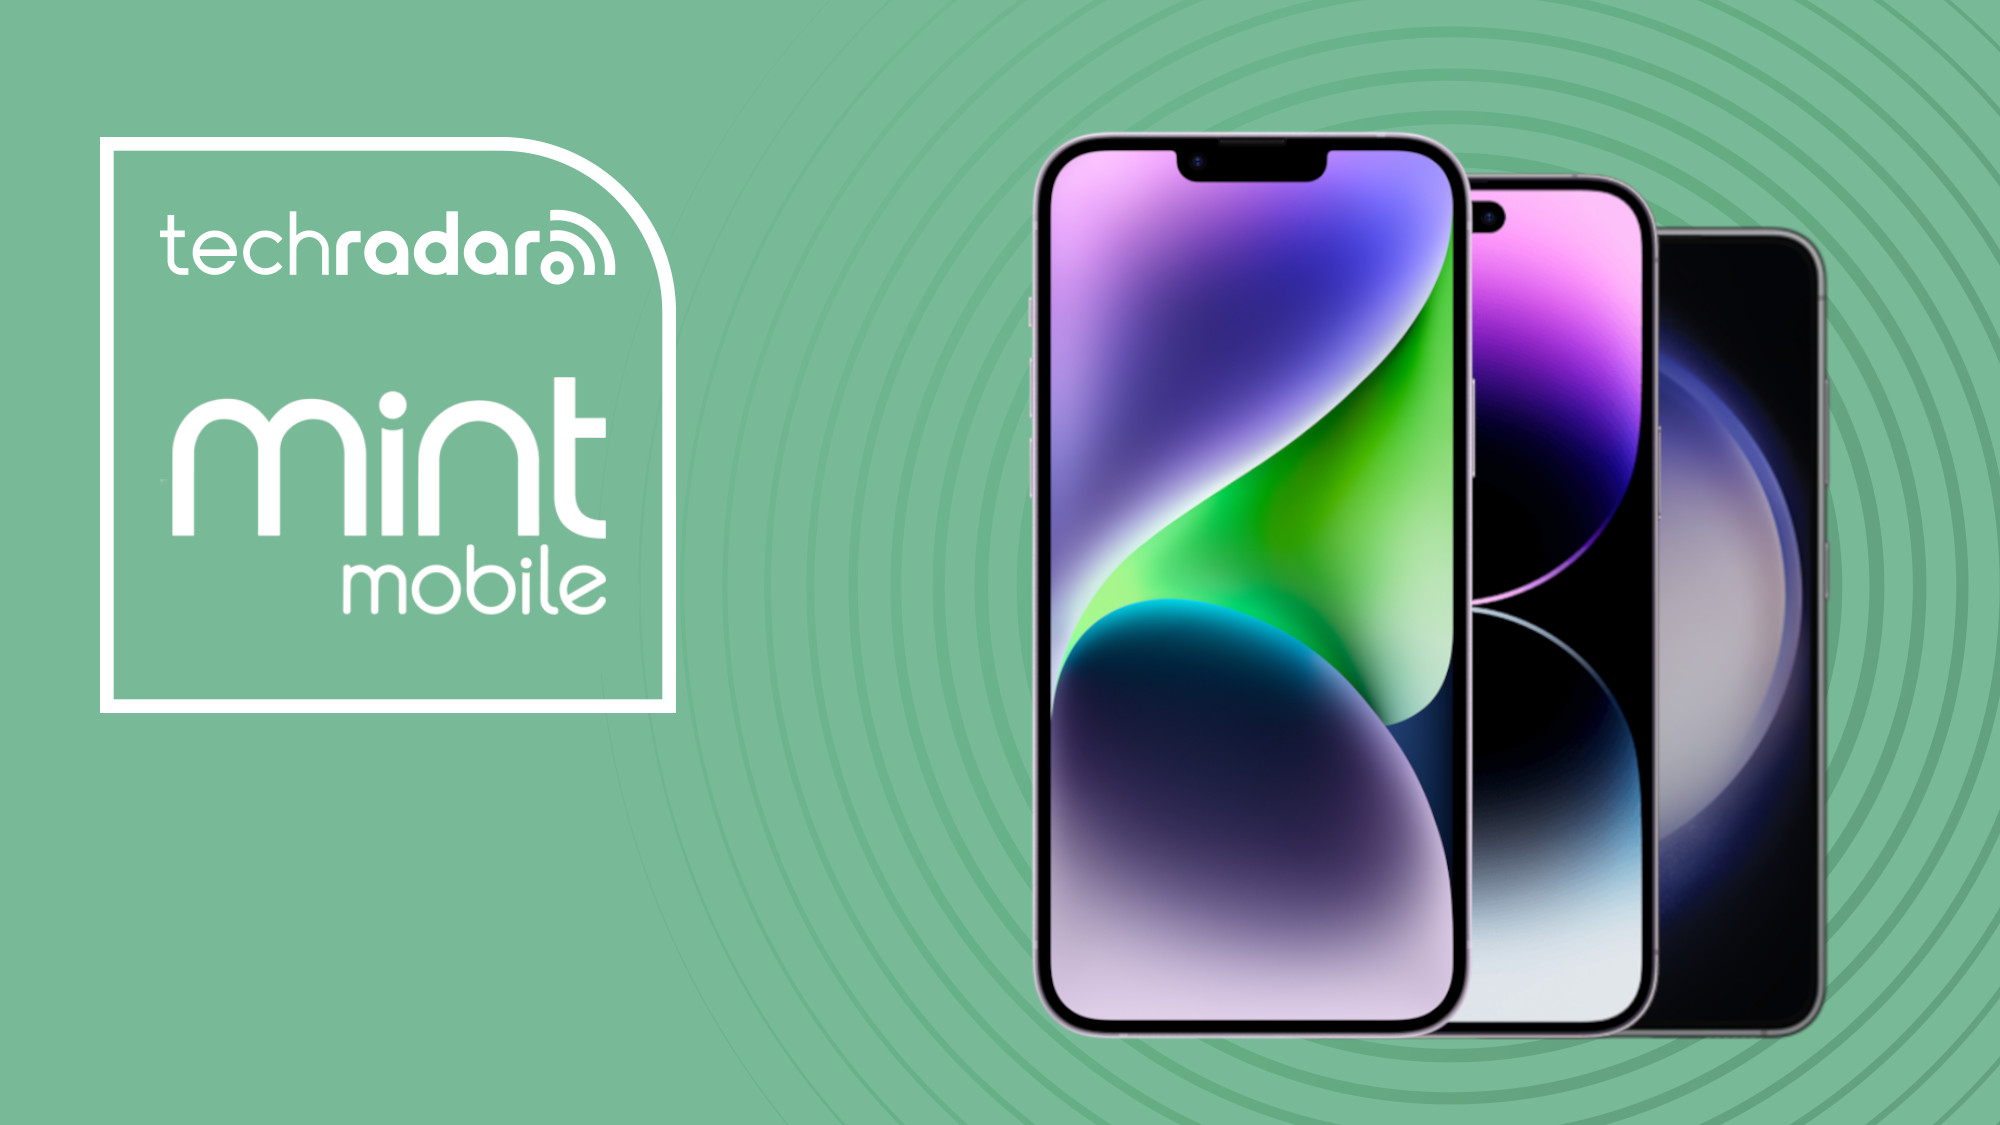 flash-sale-gets-you-3-months-of-mint-mobile-at-50-off